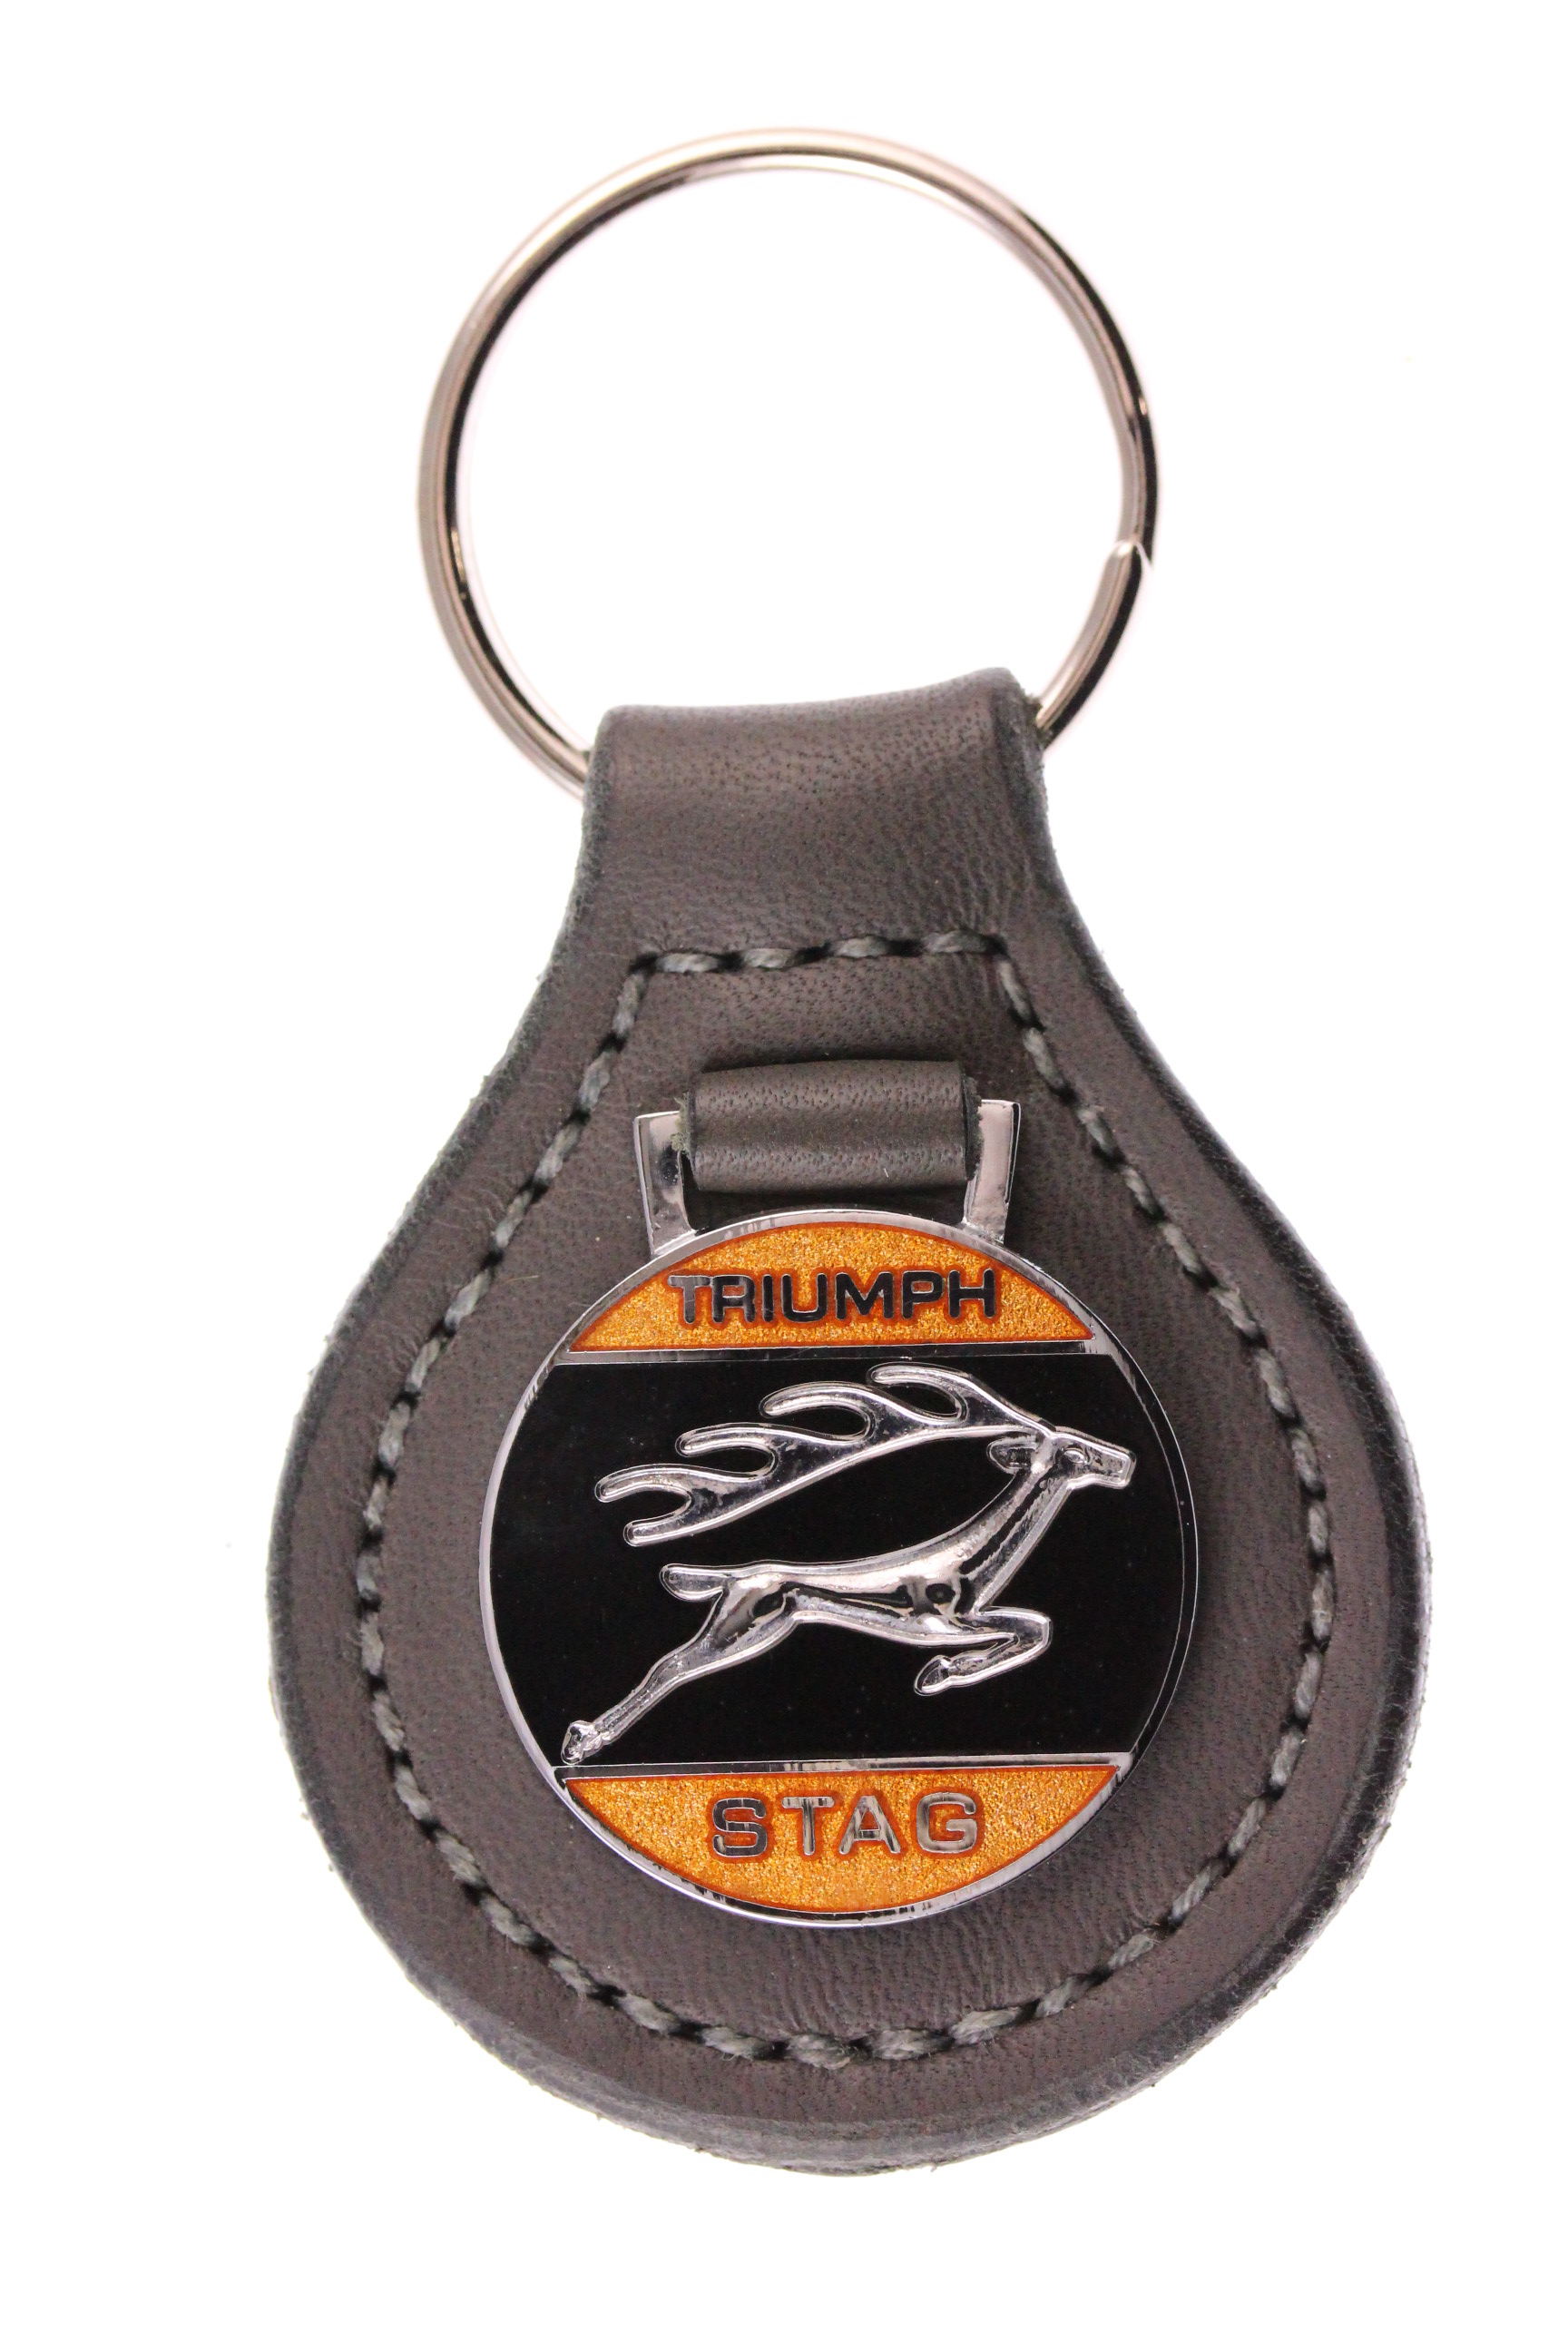 badge mounted on a leather fob Triumph Stag Keyring Key Ring